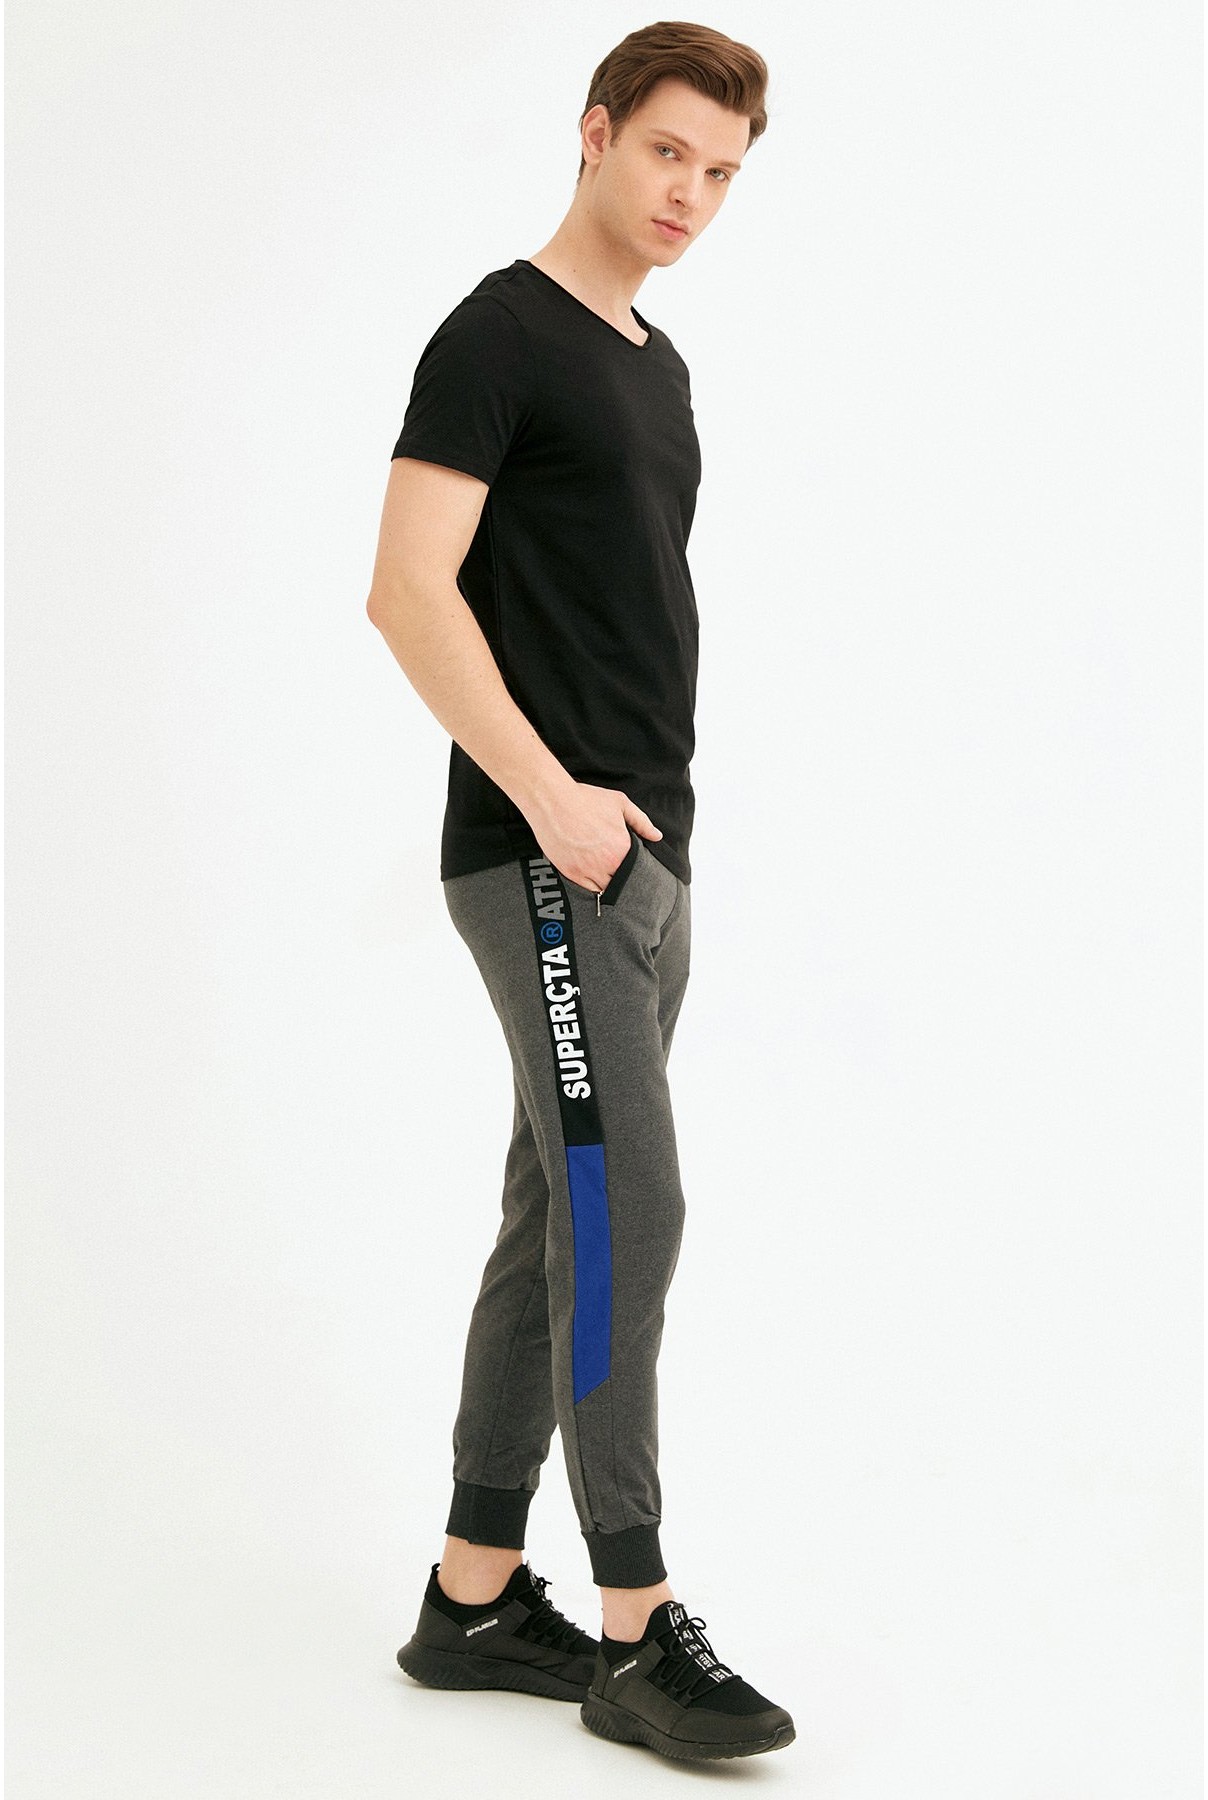 Men's pants with writing